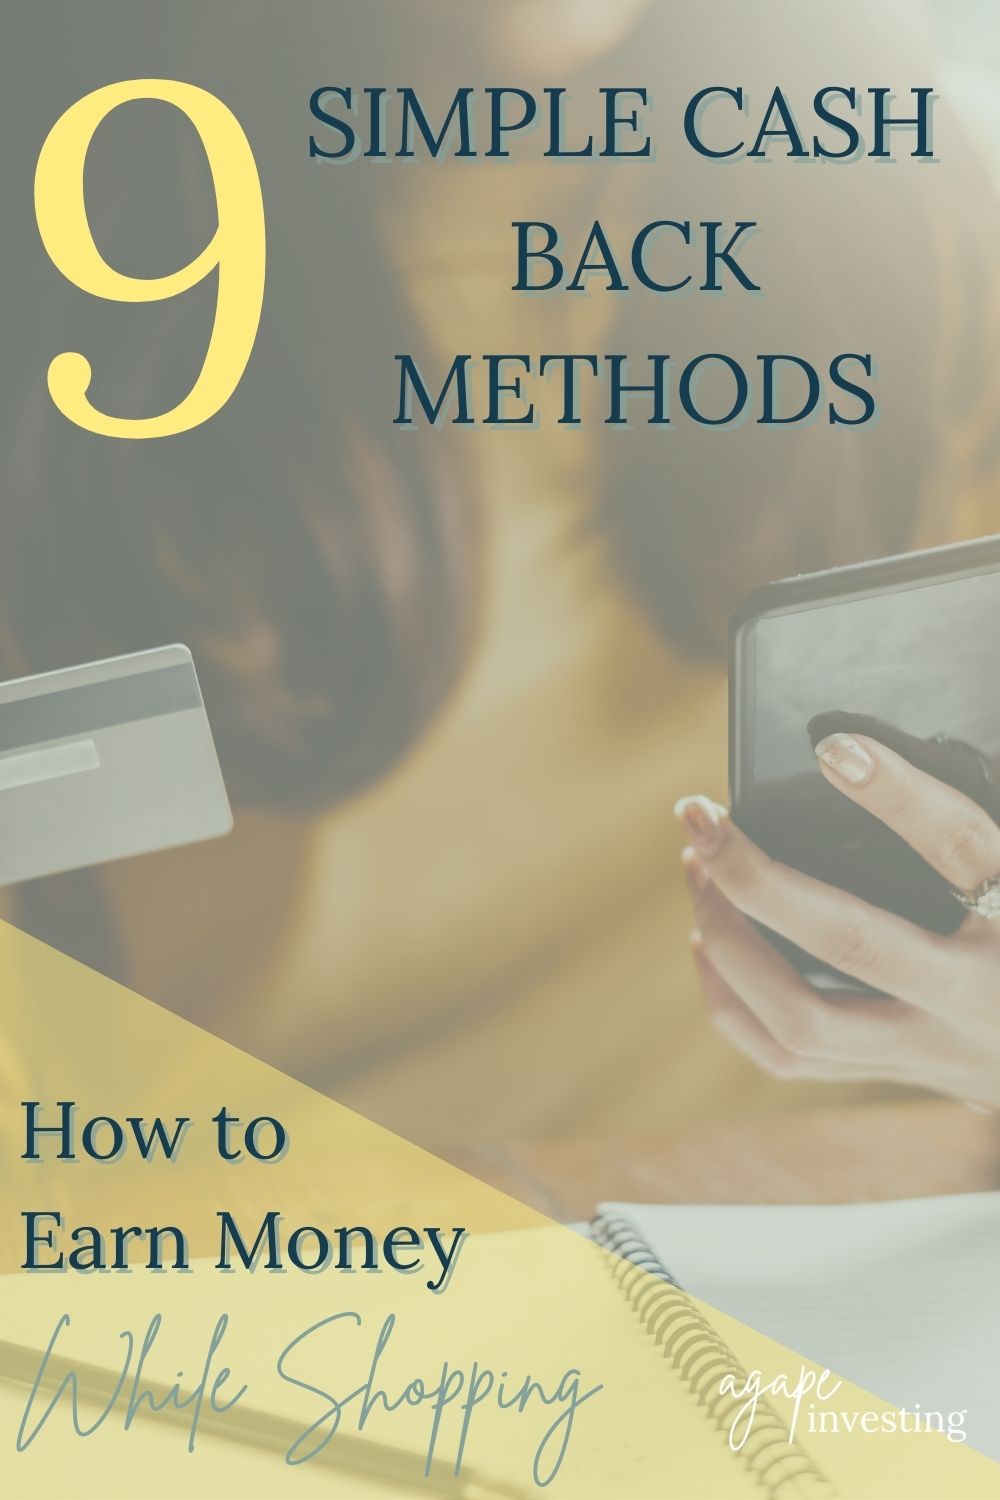 I have made over $700 while shopping using cash back apps and sites. In this article I will show you exactly how to earn money while shopping using these simple cash back methods. Use these cash back apps and sites to save money on groceries, home products, electronics, clothes, and more. #cashbackapp #cashback #earnmoney #savemoneyshopping #makemoneyshopping #earnmoneywhileshopping